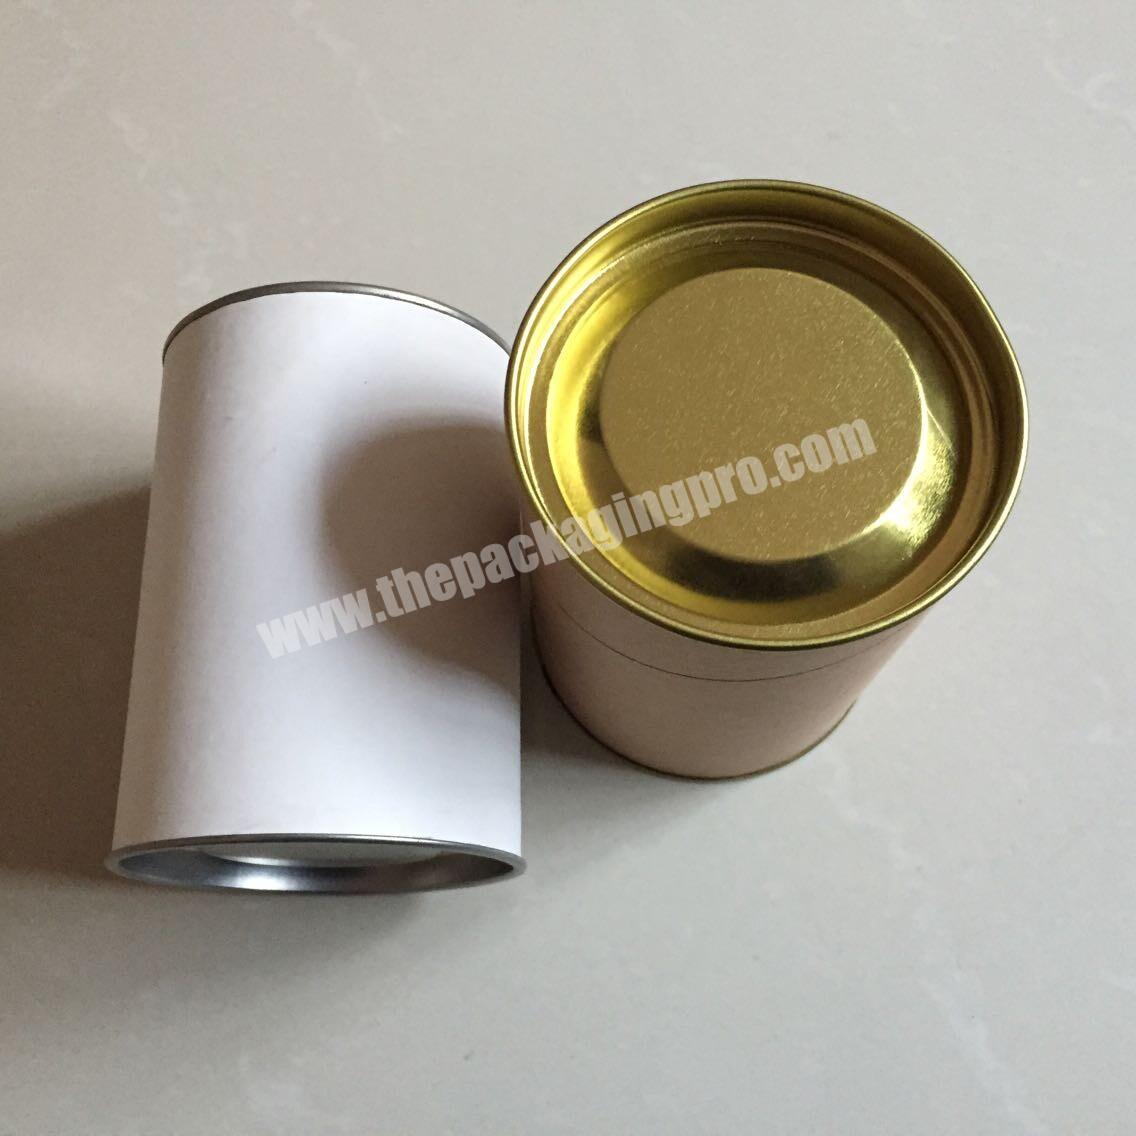 Shipping Tube Manufacturers